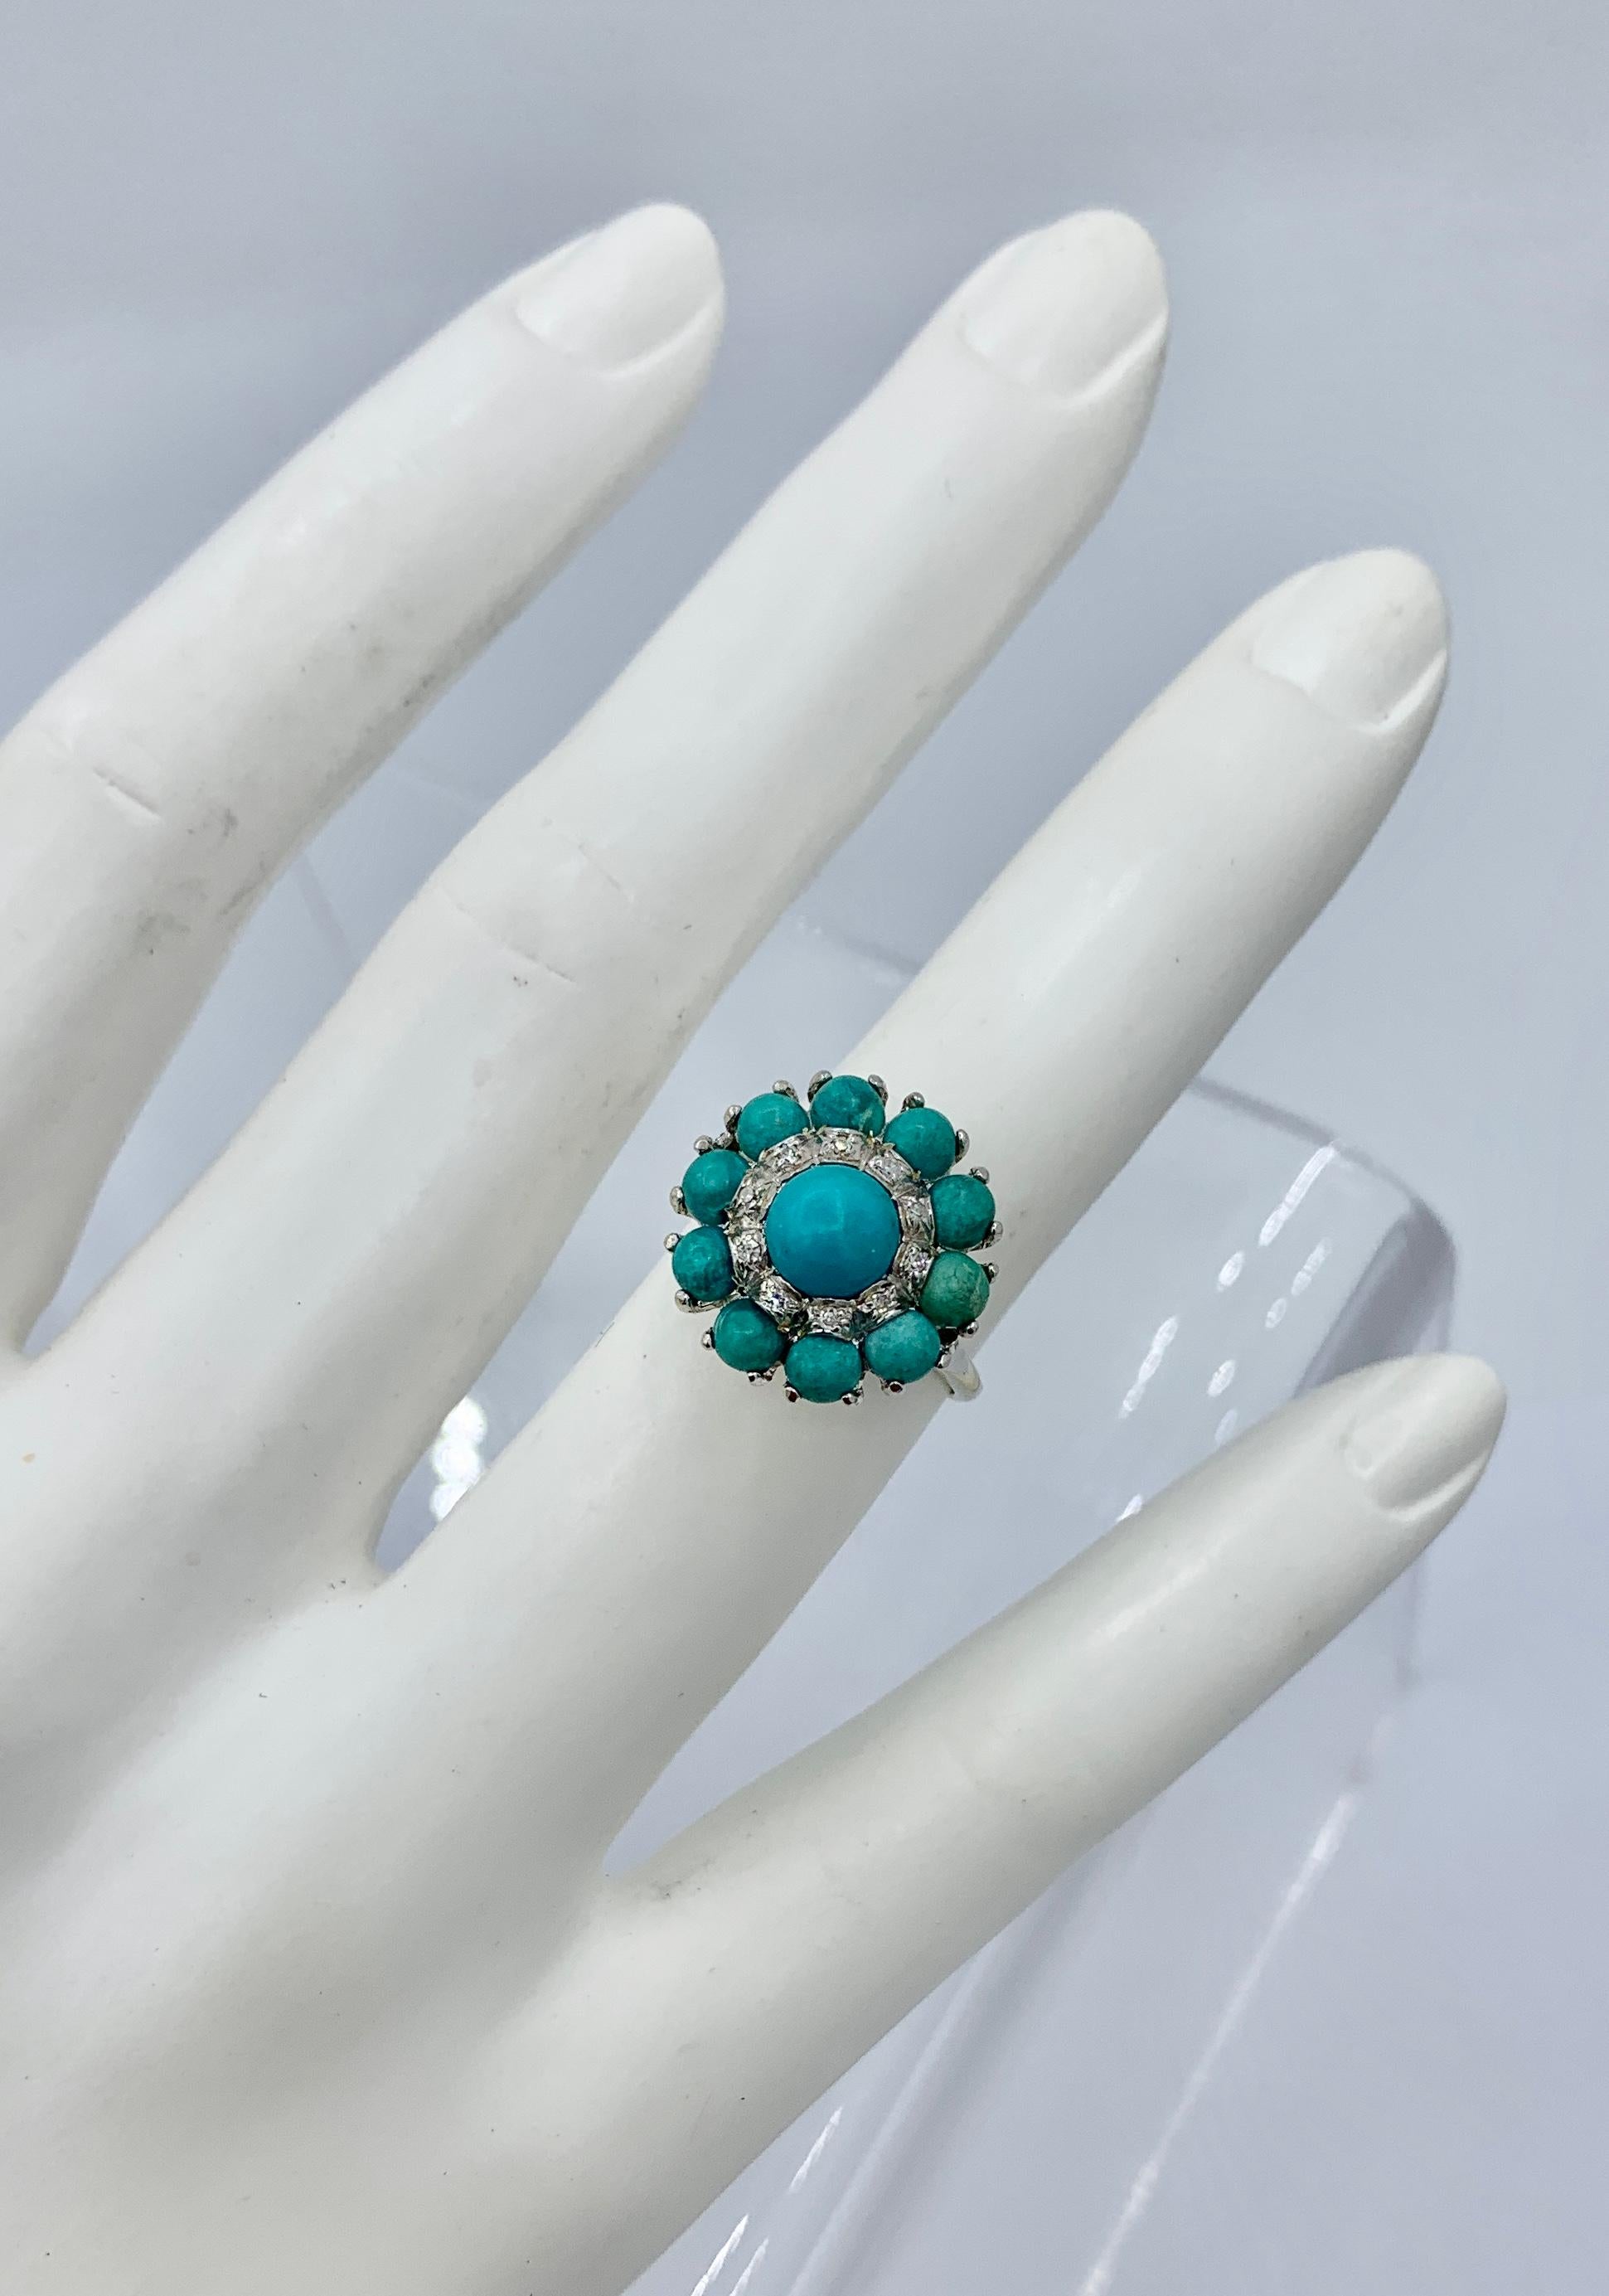 This is a gorgeous Antique Retro - Art Deco Ring with gorgeous natural Persian Turquoise cabochons of stunning beauty with a halo of 10 sparkling white Diamonds set in 18 Karat White Gold.   The central Persian Turquoise is a beautiful large domed